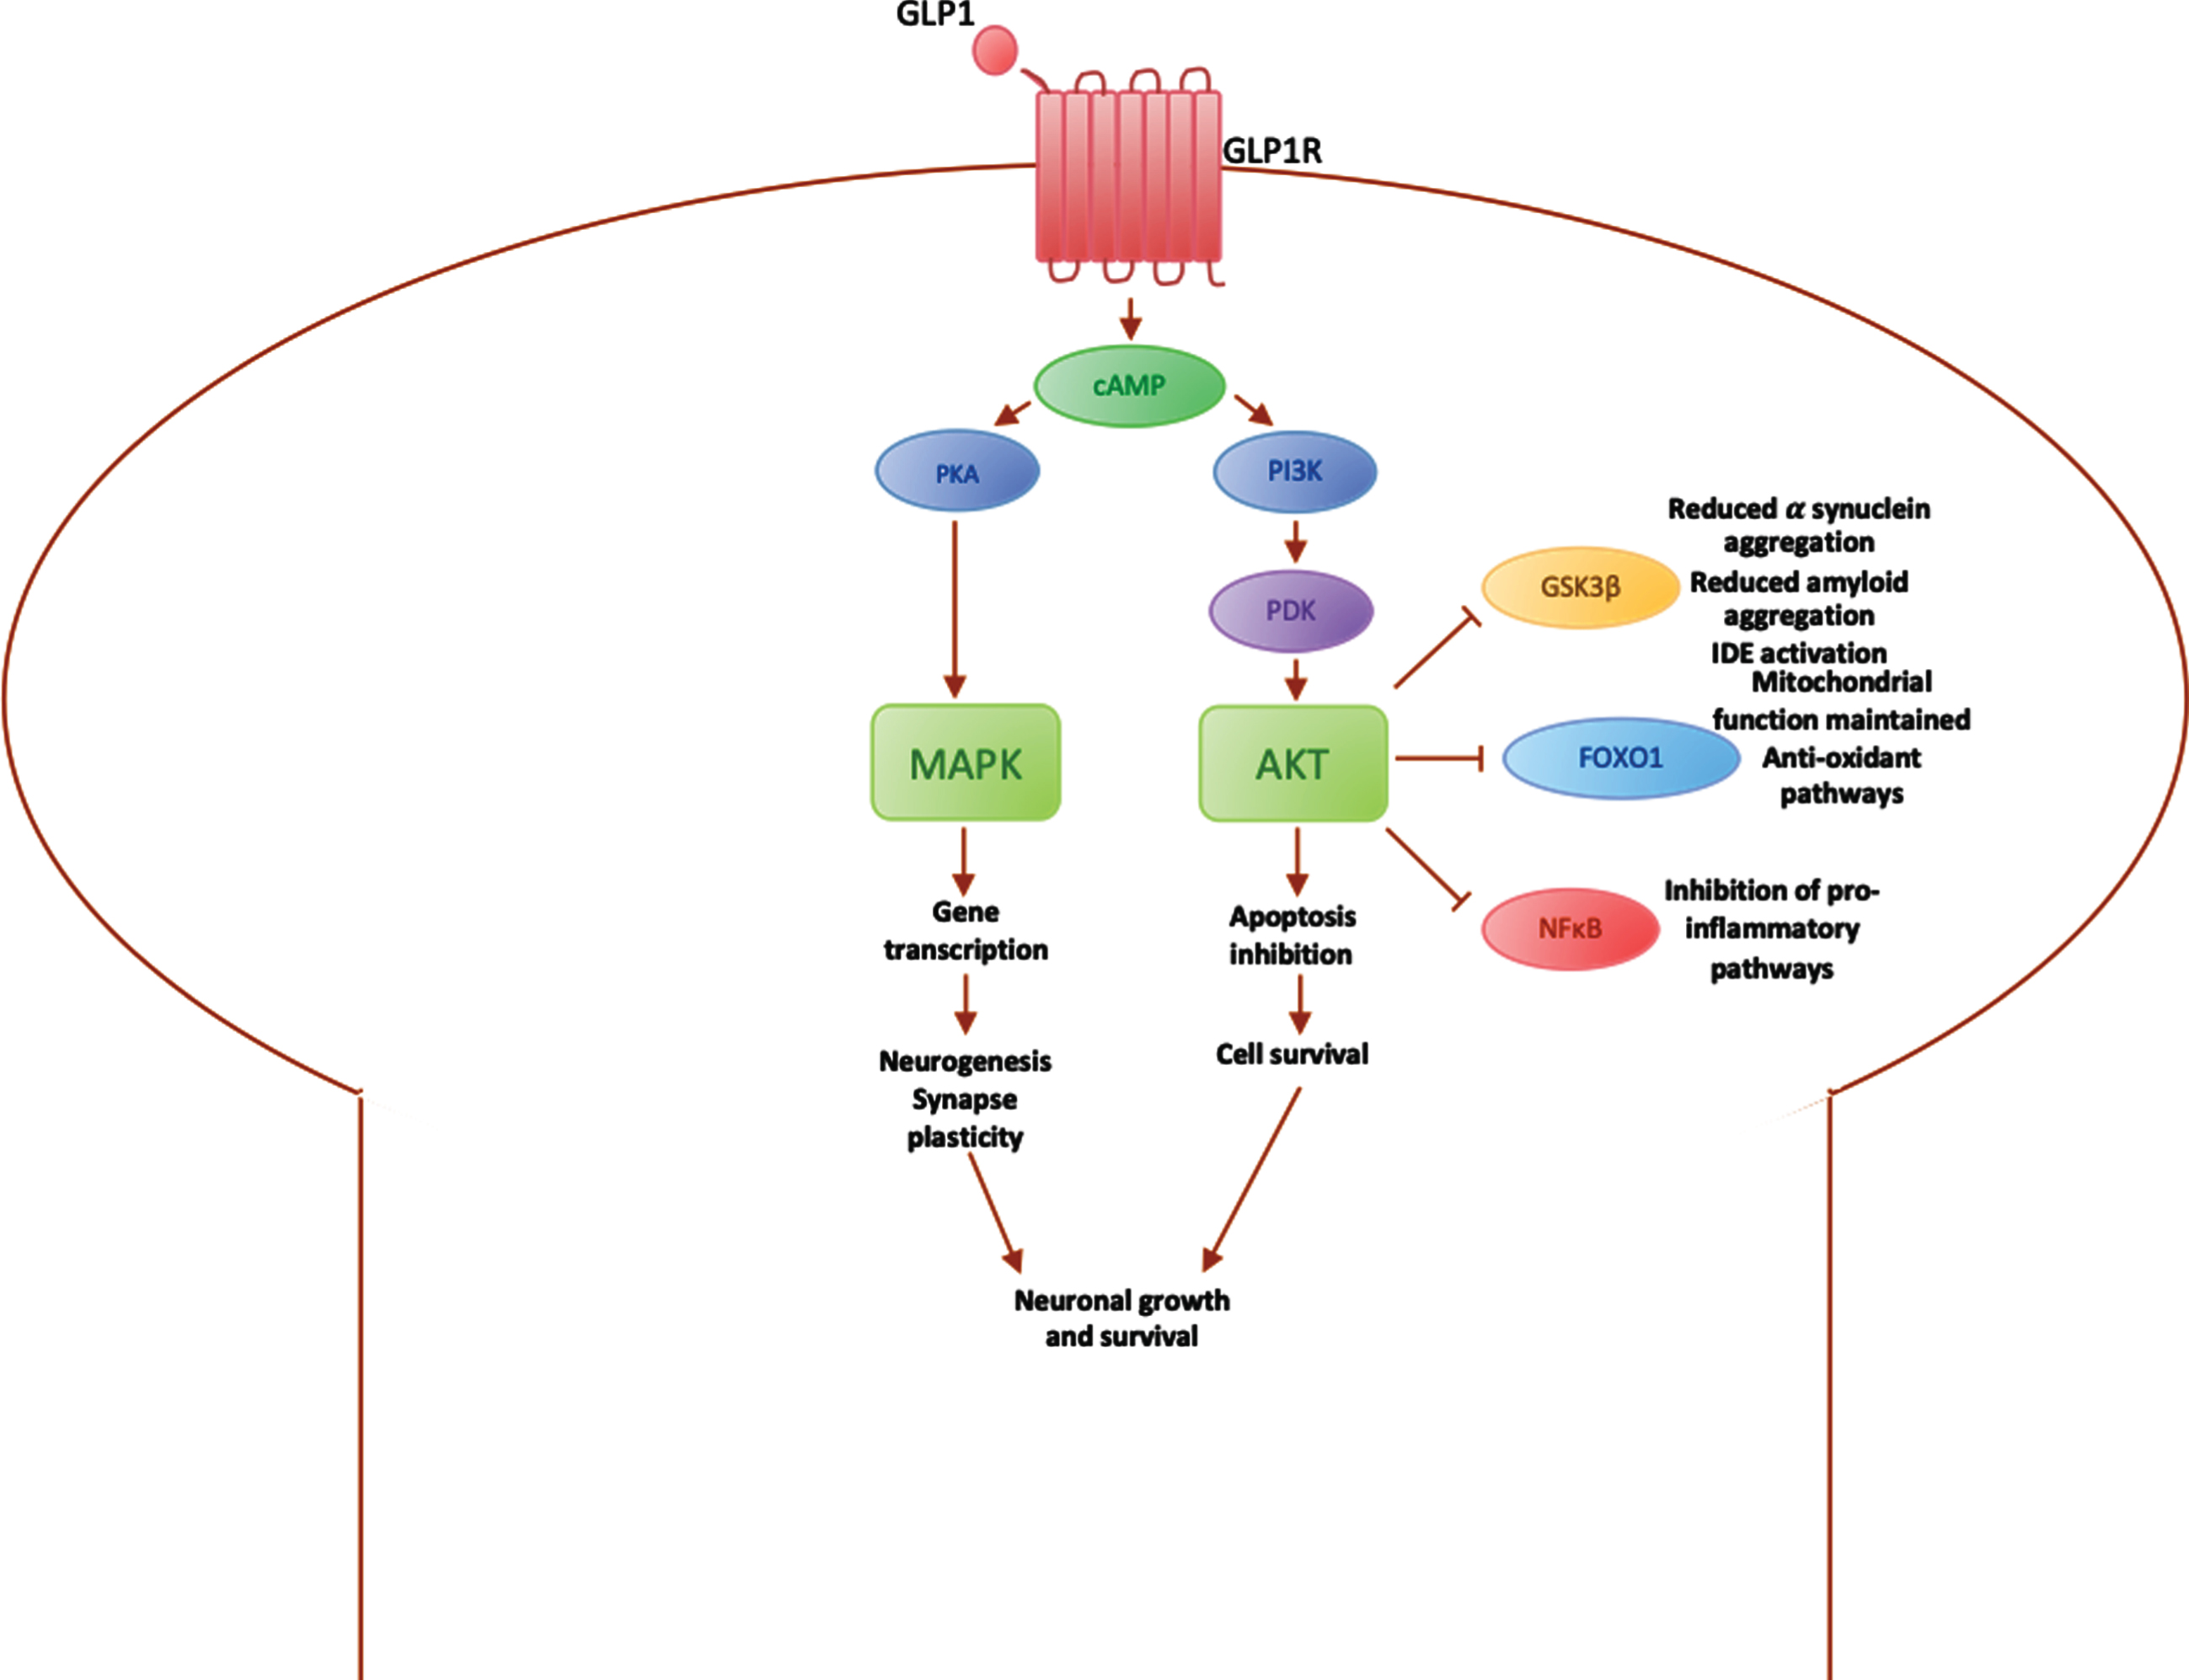 Diagrammatic summary of main pathways involved in GLP1 signalling in the brain. PI3K, phosphoinositide-3-kinase; PDK, 3-phosphoinositide-dependent protein kinase; Akt, protein kinase B (PKB), plays a key role in activating downstream regulators of cell metabolism, proliferation and survival; GSK3β, glycogen synthase kinase 3, downstream mediator involved in IDE inactivation, leading to an increase in α synuclein expression, which aggregate into amyloid fibres; FOXO1, Forkhead box O1, involved in maintaining the mitochondrial electron transport chain for ATP generation and fatty acid oxidation, preventing oxidative stress; NFκB, nuclear factor κB regulates microglial activation and the expression of inflammatory mediators such as IL1β and TNFα; cAMP, cyclic AMP, activated by binding of GLP1 to GLP1 receptor; PKA, protein kinase A, activates downstream processes via MAPK pathway; MAPK, mitogen-activated protein kinase, modulates downstream protein kinases involved in regulating cell proliferation, differentiation and apoptosis, maintaining neuronal growth and survival.